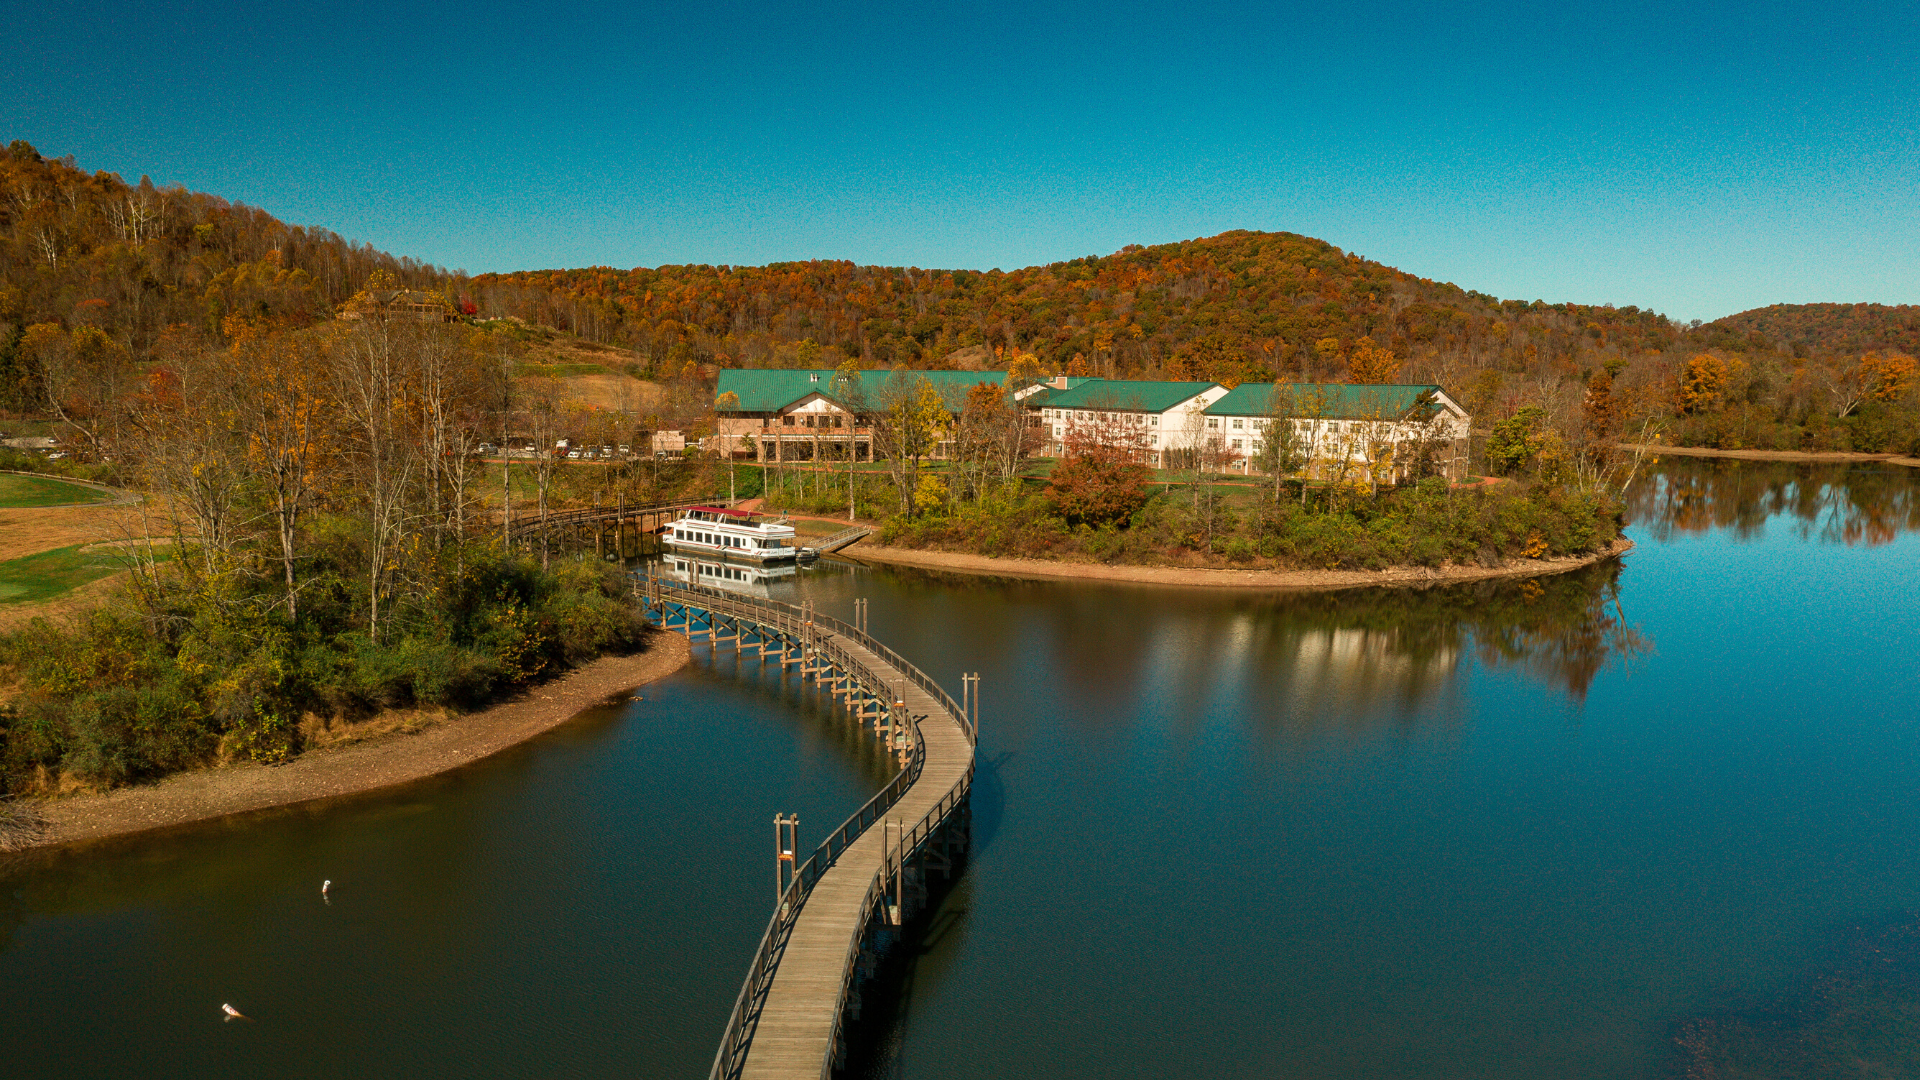 TreatYourself at Stonewall Resort State Park - West Virginia State